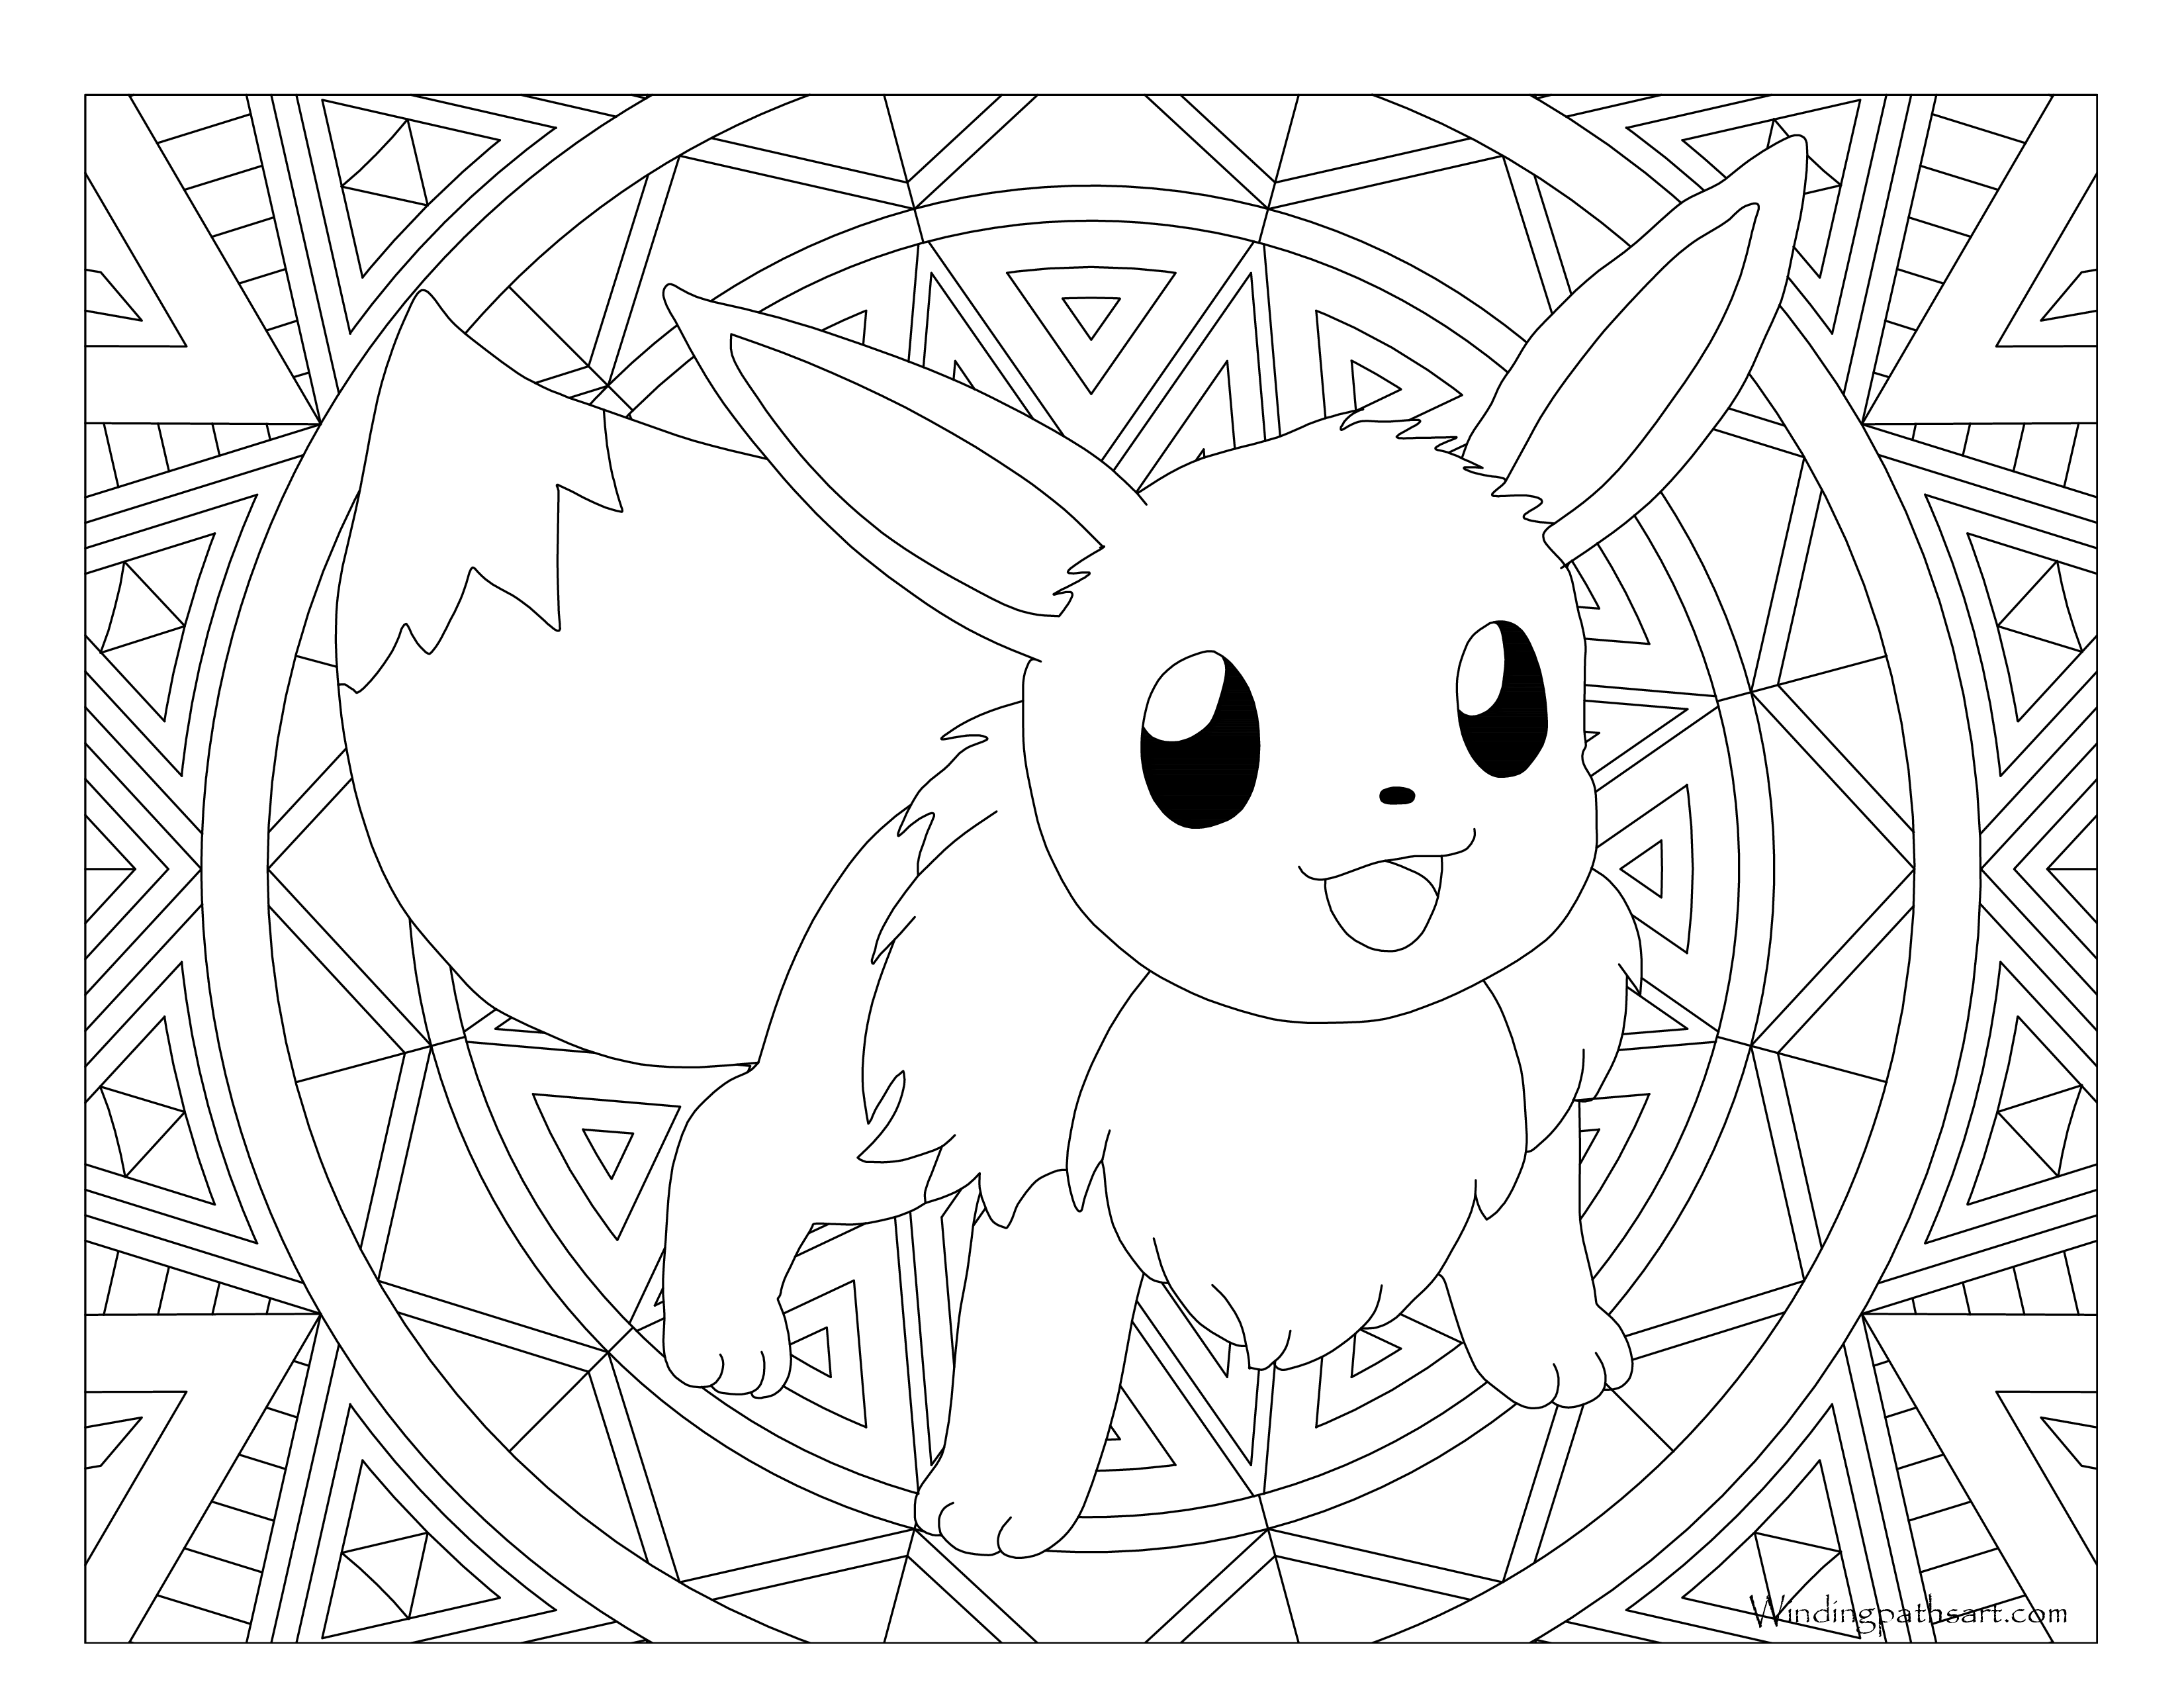 Eevee Pokemon coloring page, Free Printable Coloring Pages